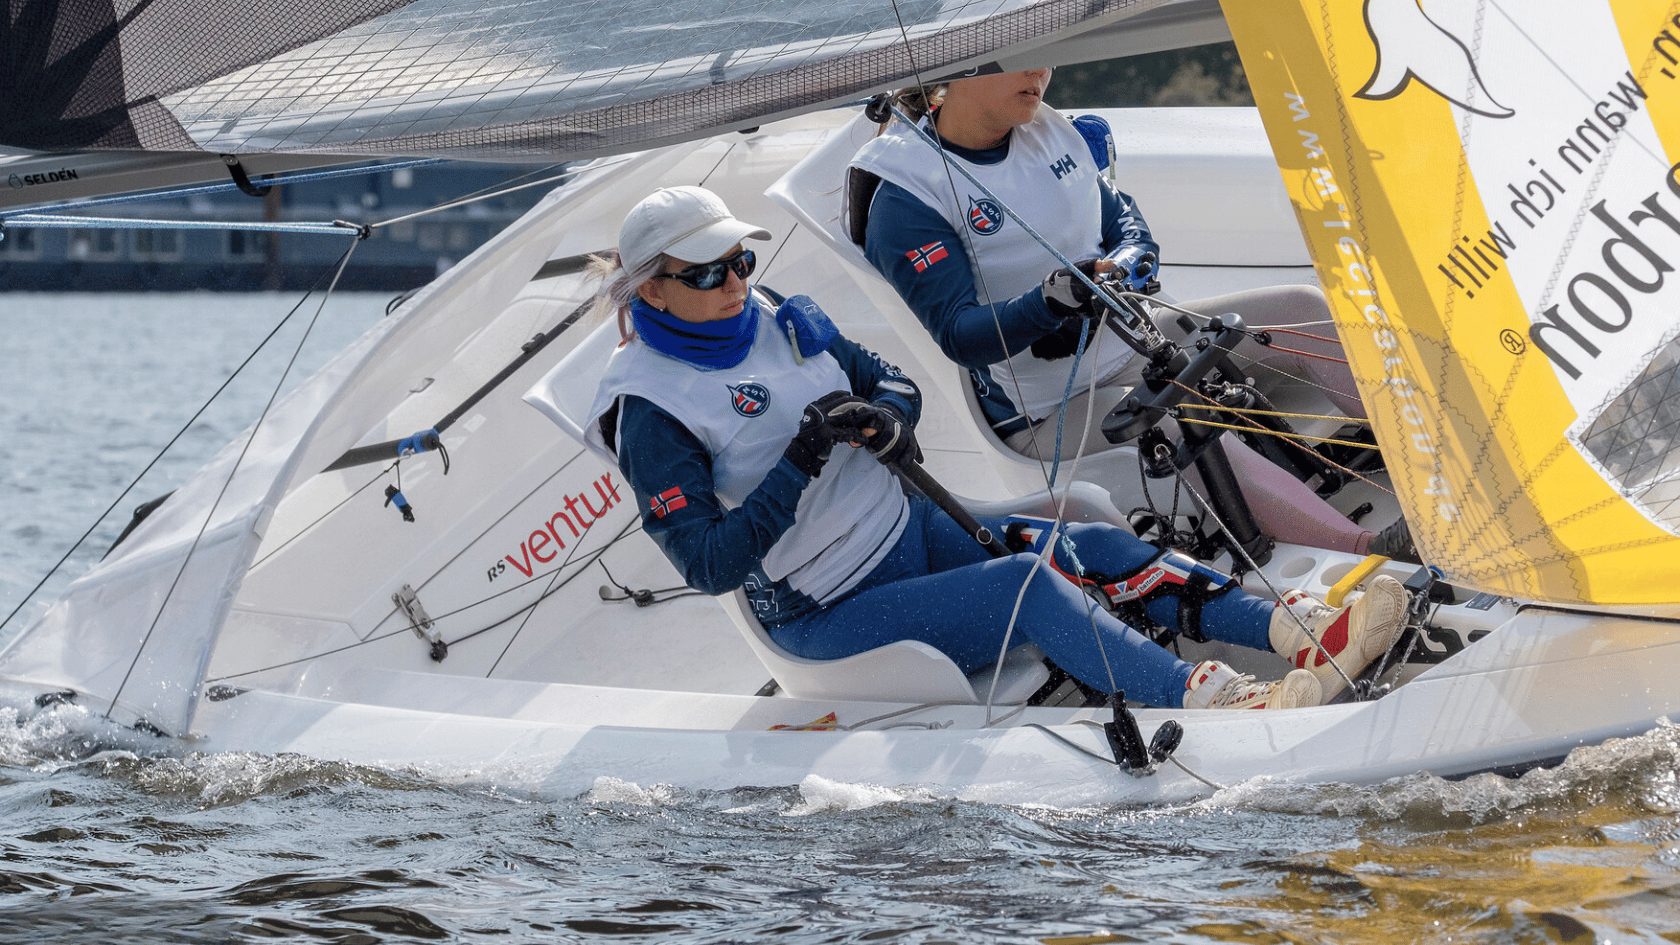 Day 10 Update: 2023 Sailing World Championships in The Netherlands - US  Sailing